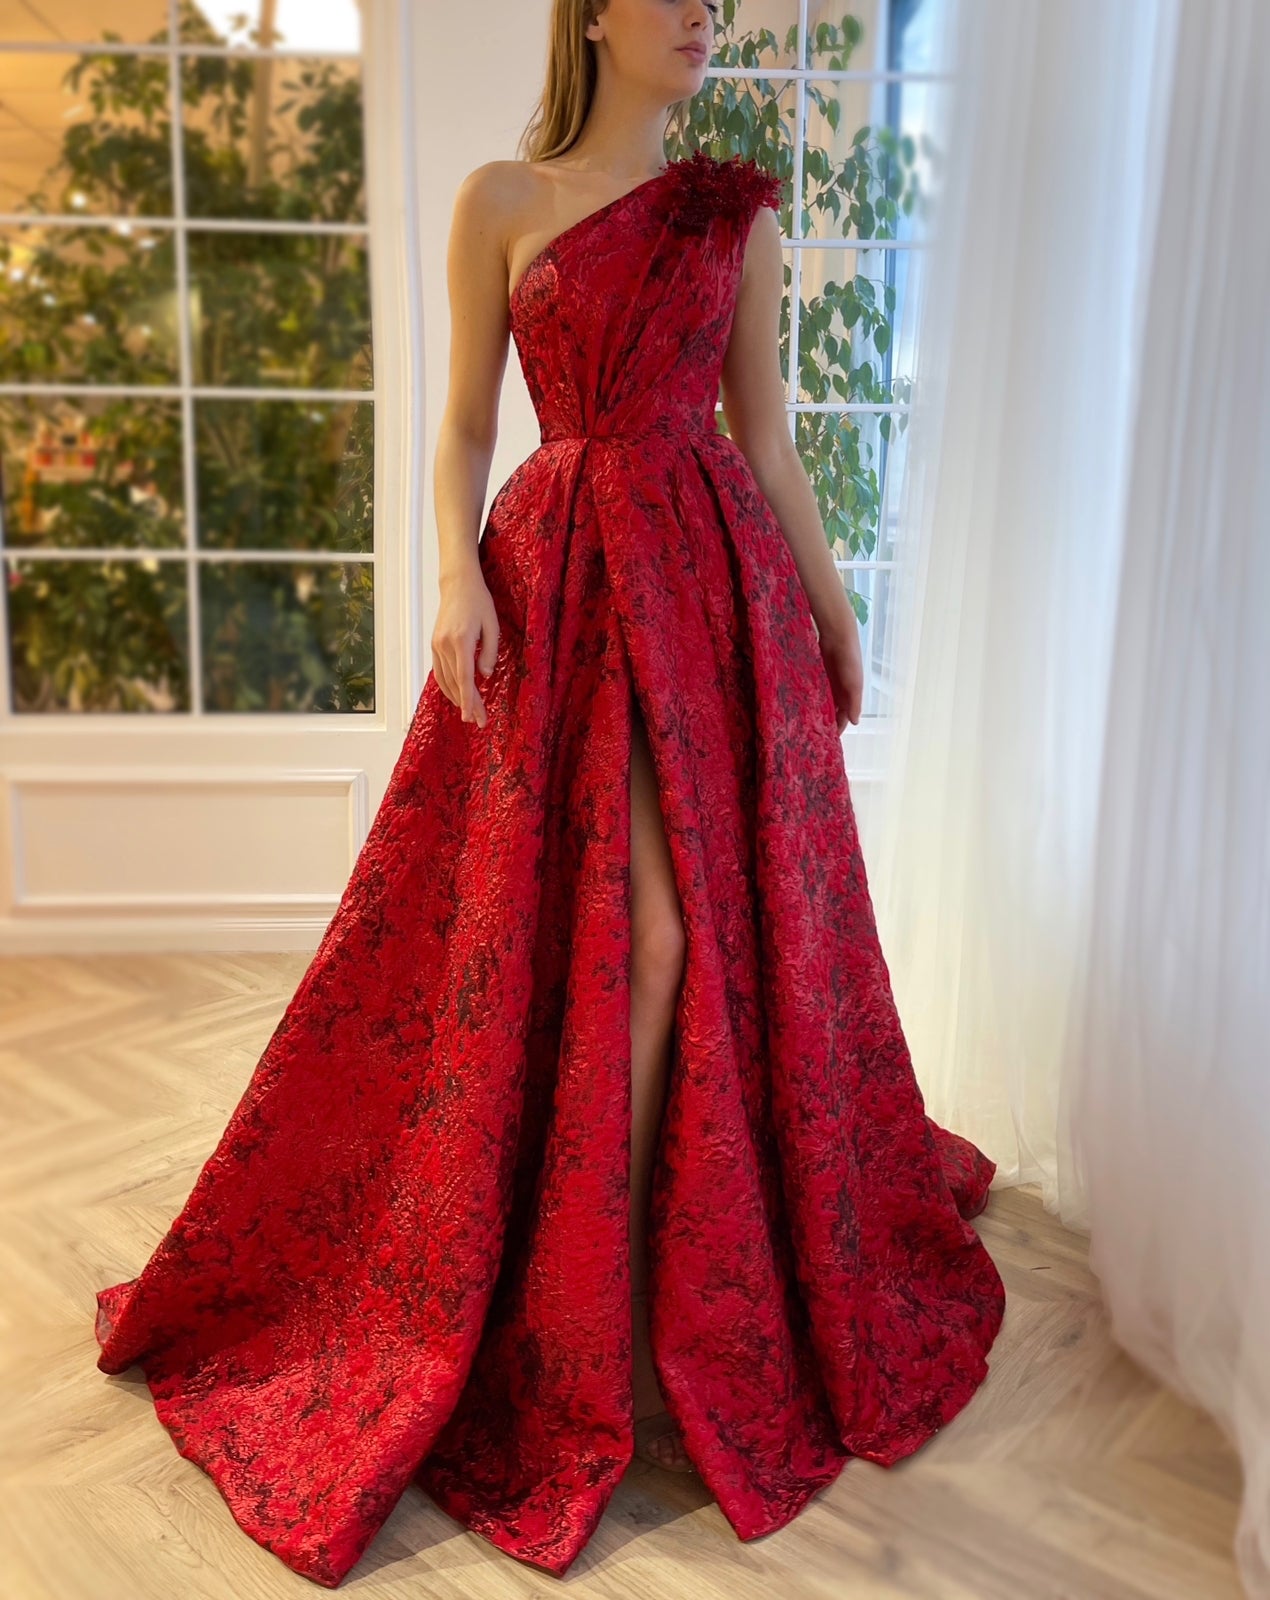 Red A-Line dress with embroidery and one shoulder sleeve